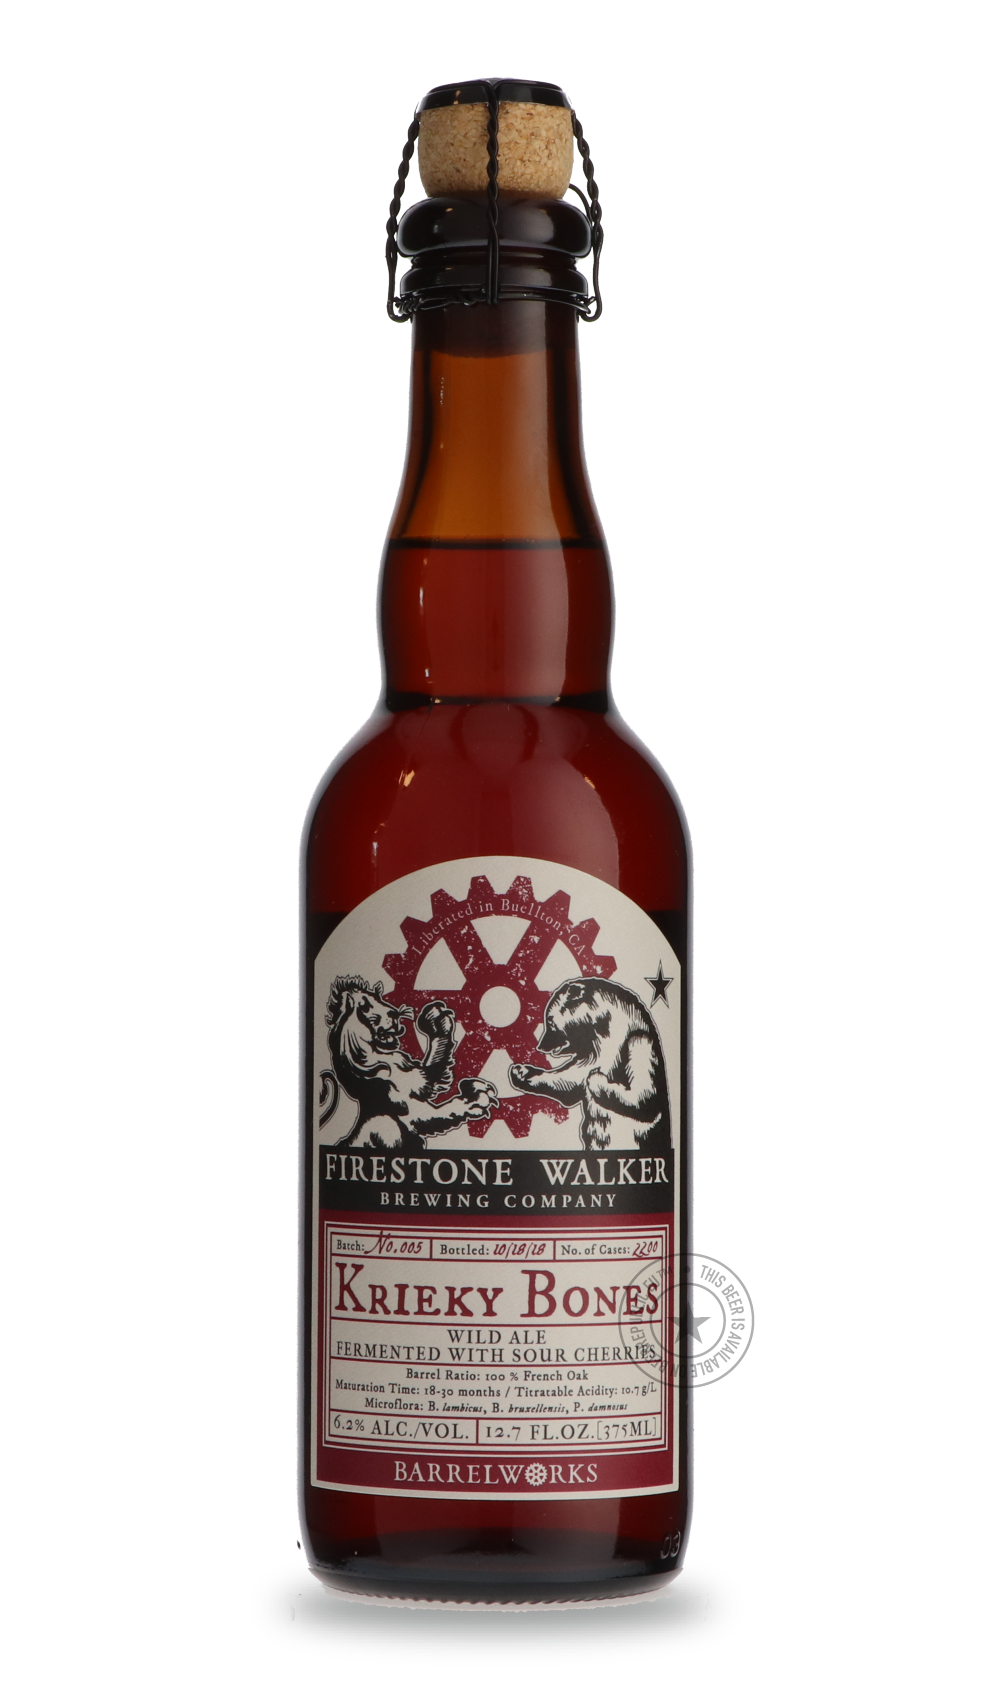 -Firestone Walker- Krieky Bones-Sour / Wild & Fruity- Only @ Beer Republic - The best online beer store for American & Canadian craft beer - Buy beer online from the USA and Canada - Bier online kopen - Amerikaans bier kopen - Craft beer store - Craft beer kopen - Amerikanisch bier kaufen - Bier online kaufen - Acheter biere online - IPA - Stout - Porter - New England IPA - Hazy IPA - Imperial Stout - Barrel Aged - Barrel Aged Imperial Stout - Brown - Dark beer - Blond - Blonde - Pilsner - Lager - Wheat - W